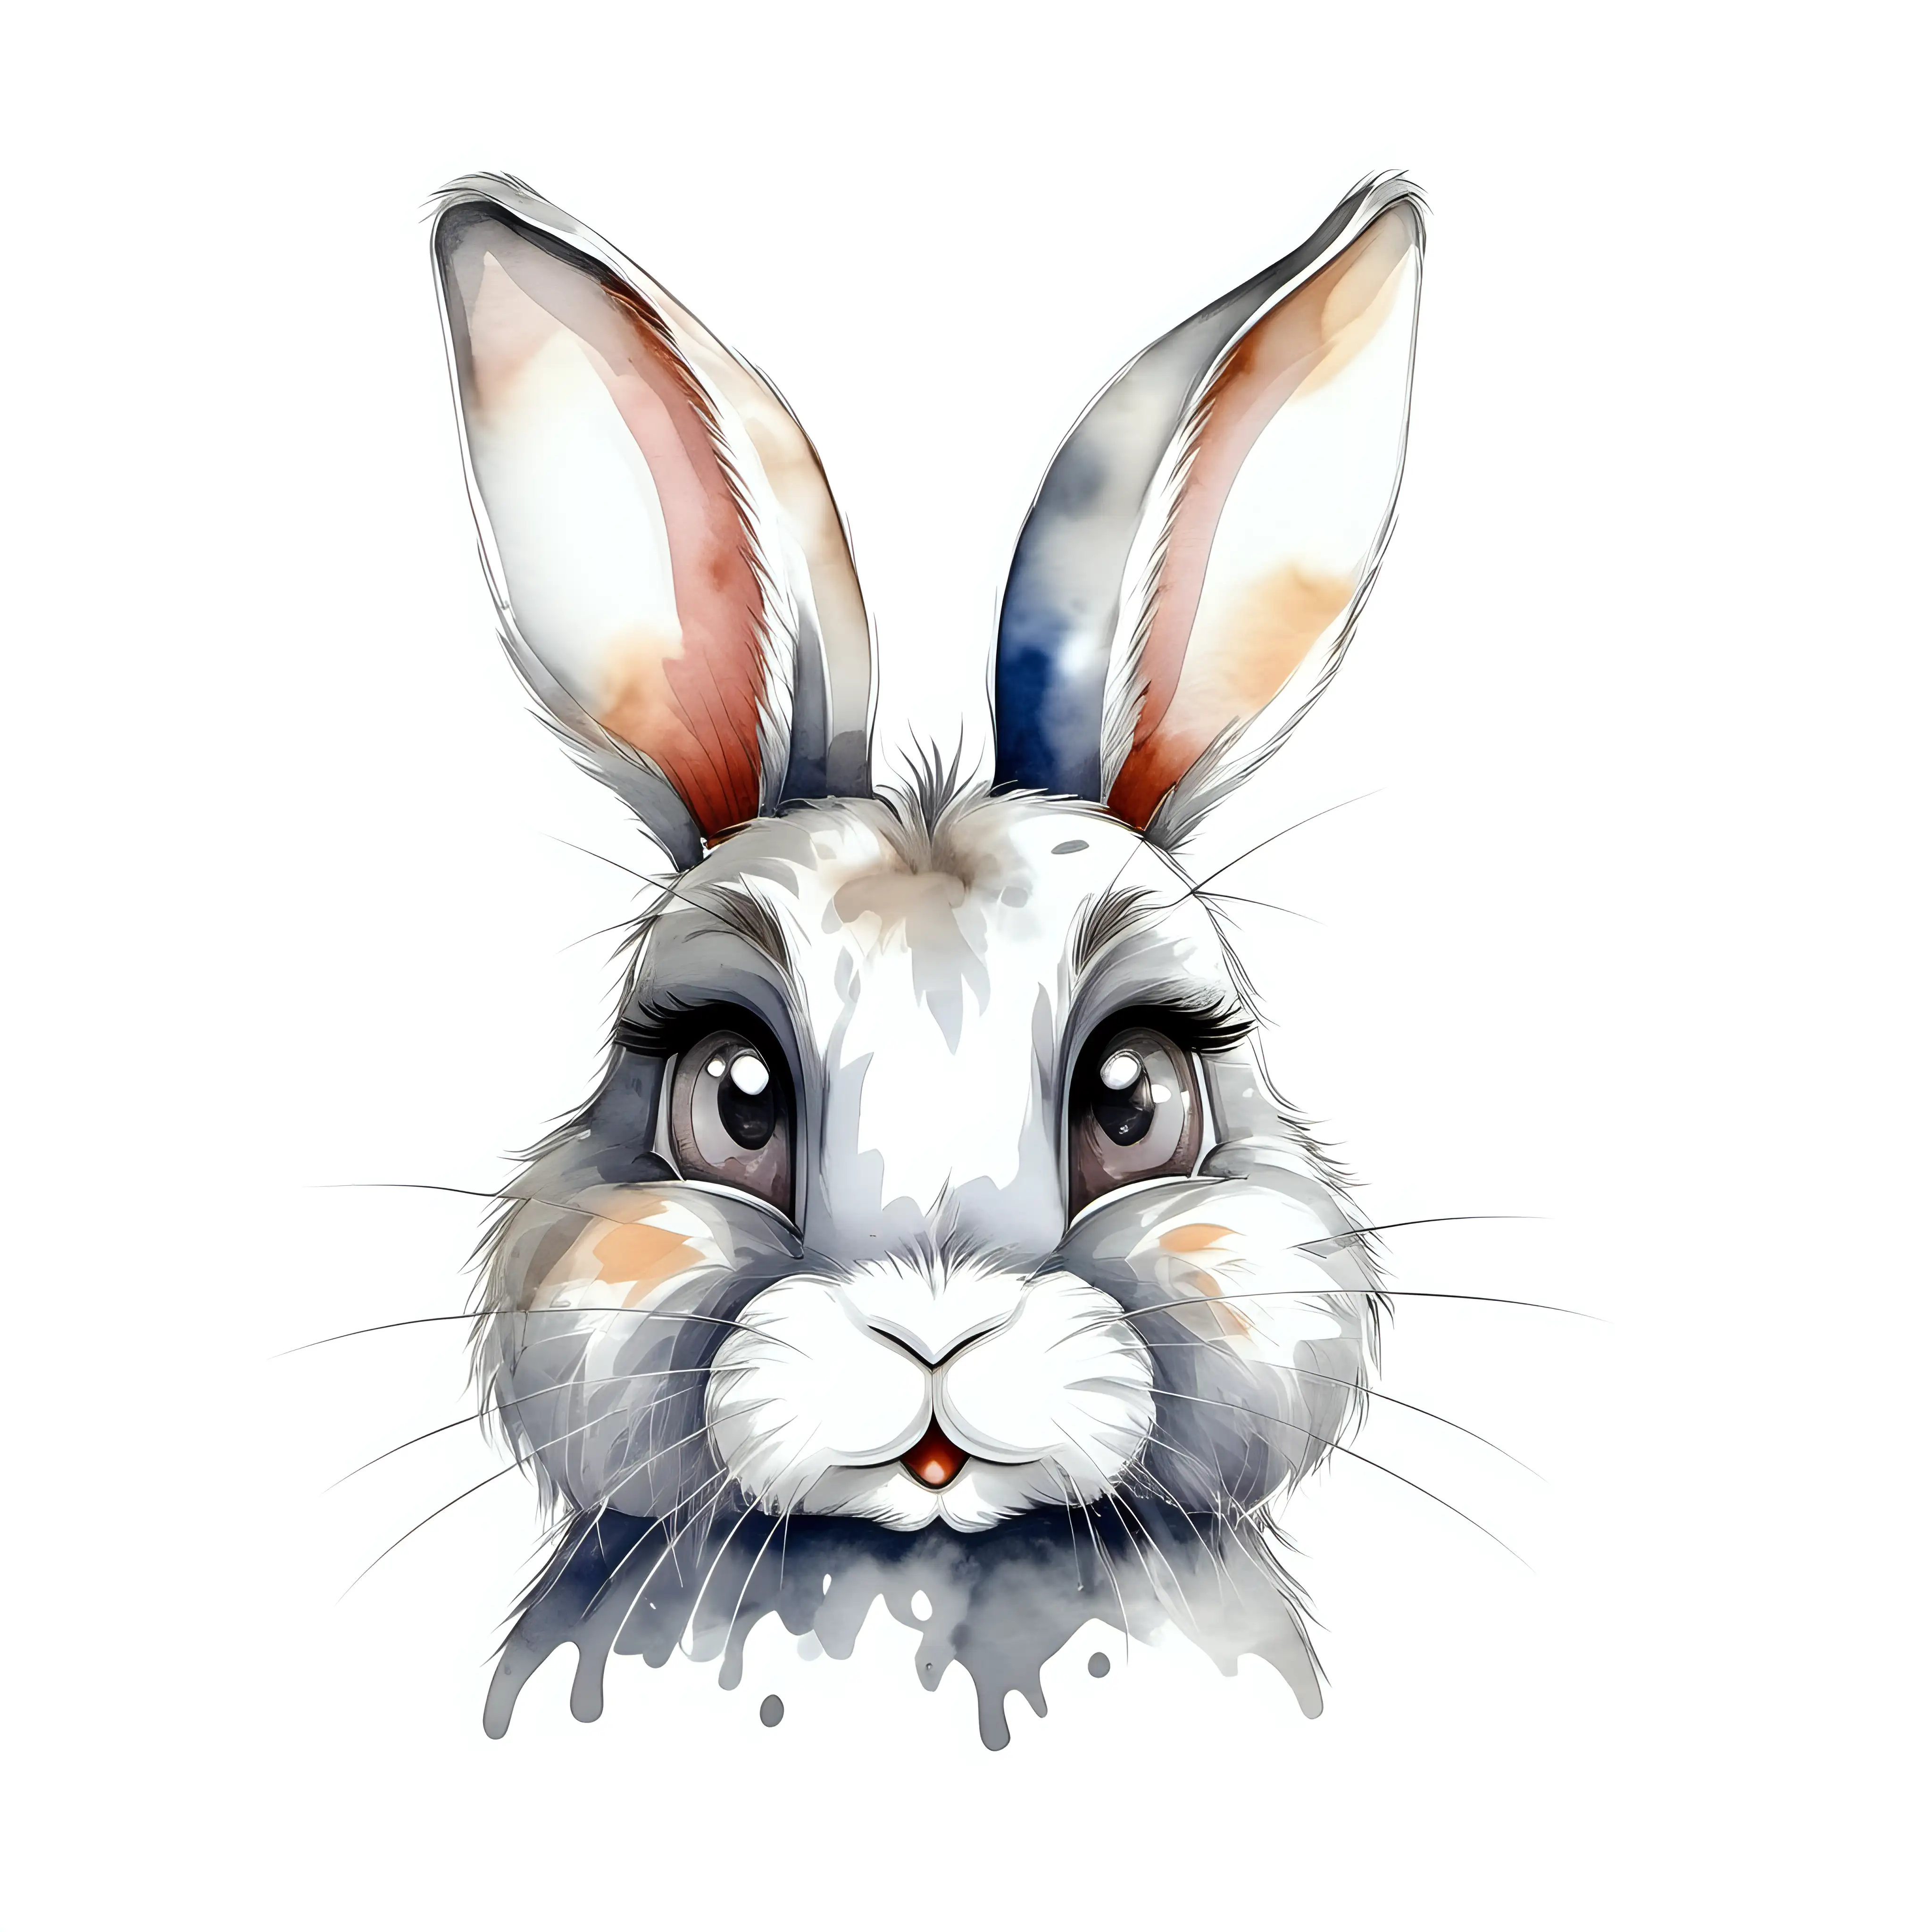 Watercolor Hand Drawn Sketch of a Furry Cartoon Rabbit with Gray Eyes